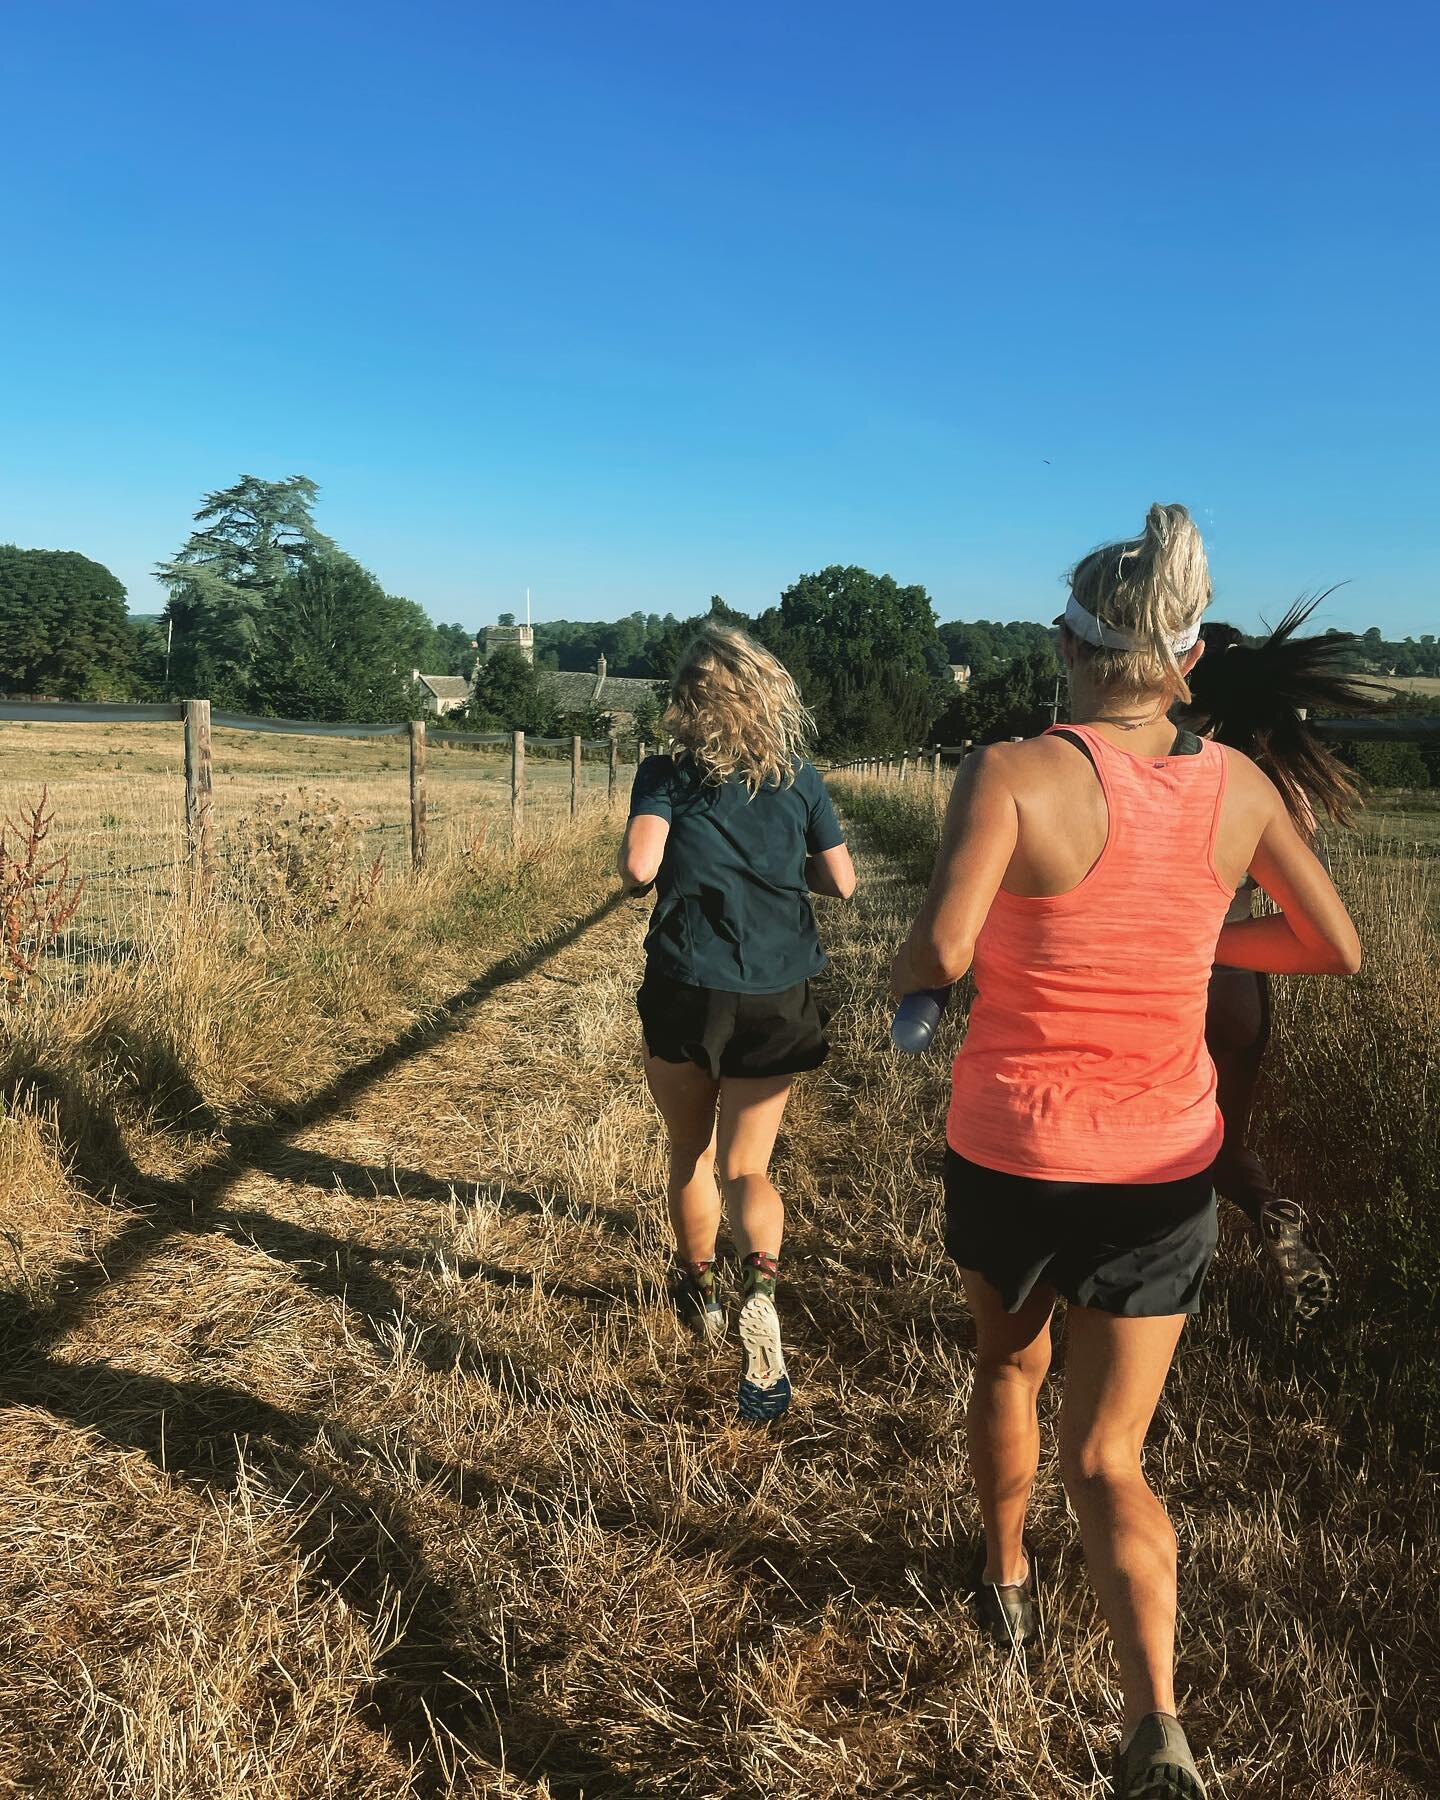 Day 2 🌾🌾
Cool places we ran in 2022 
The Cotswolds!

#jogging #england #trailrunning #newfriends #trailchix #trailrunning #trails #run #friendsthatjog #training #fitnessmotivation #fields #runsploring